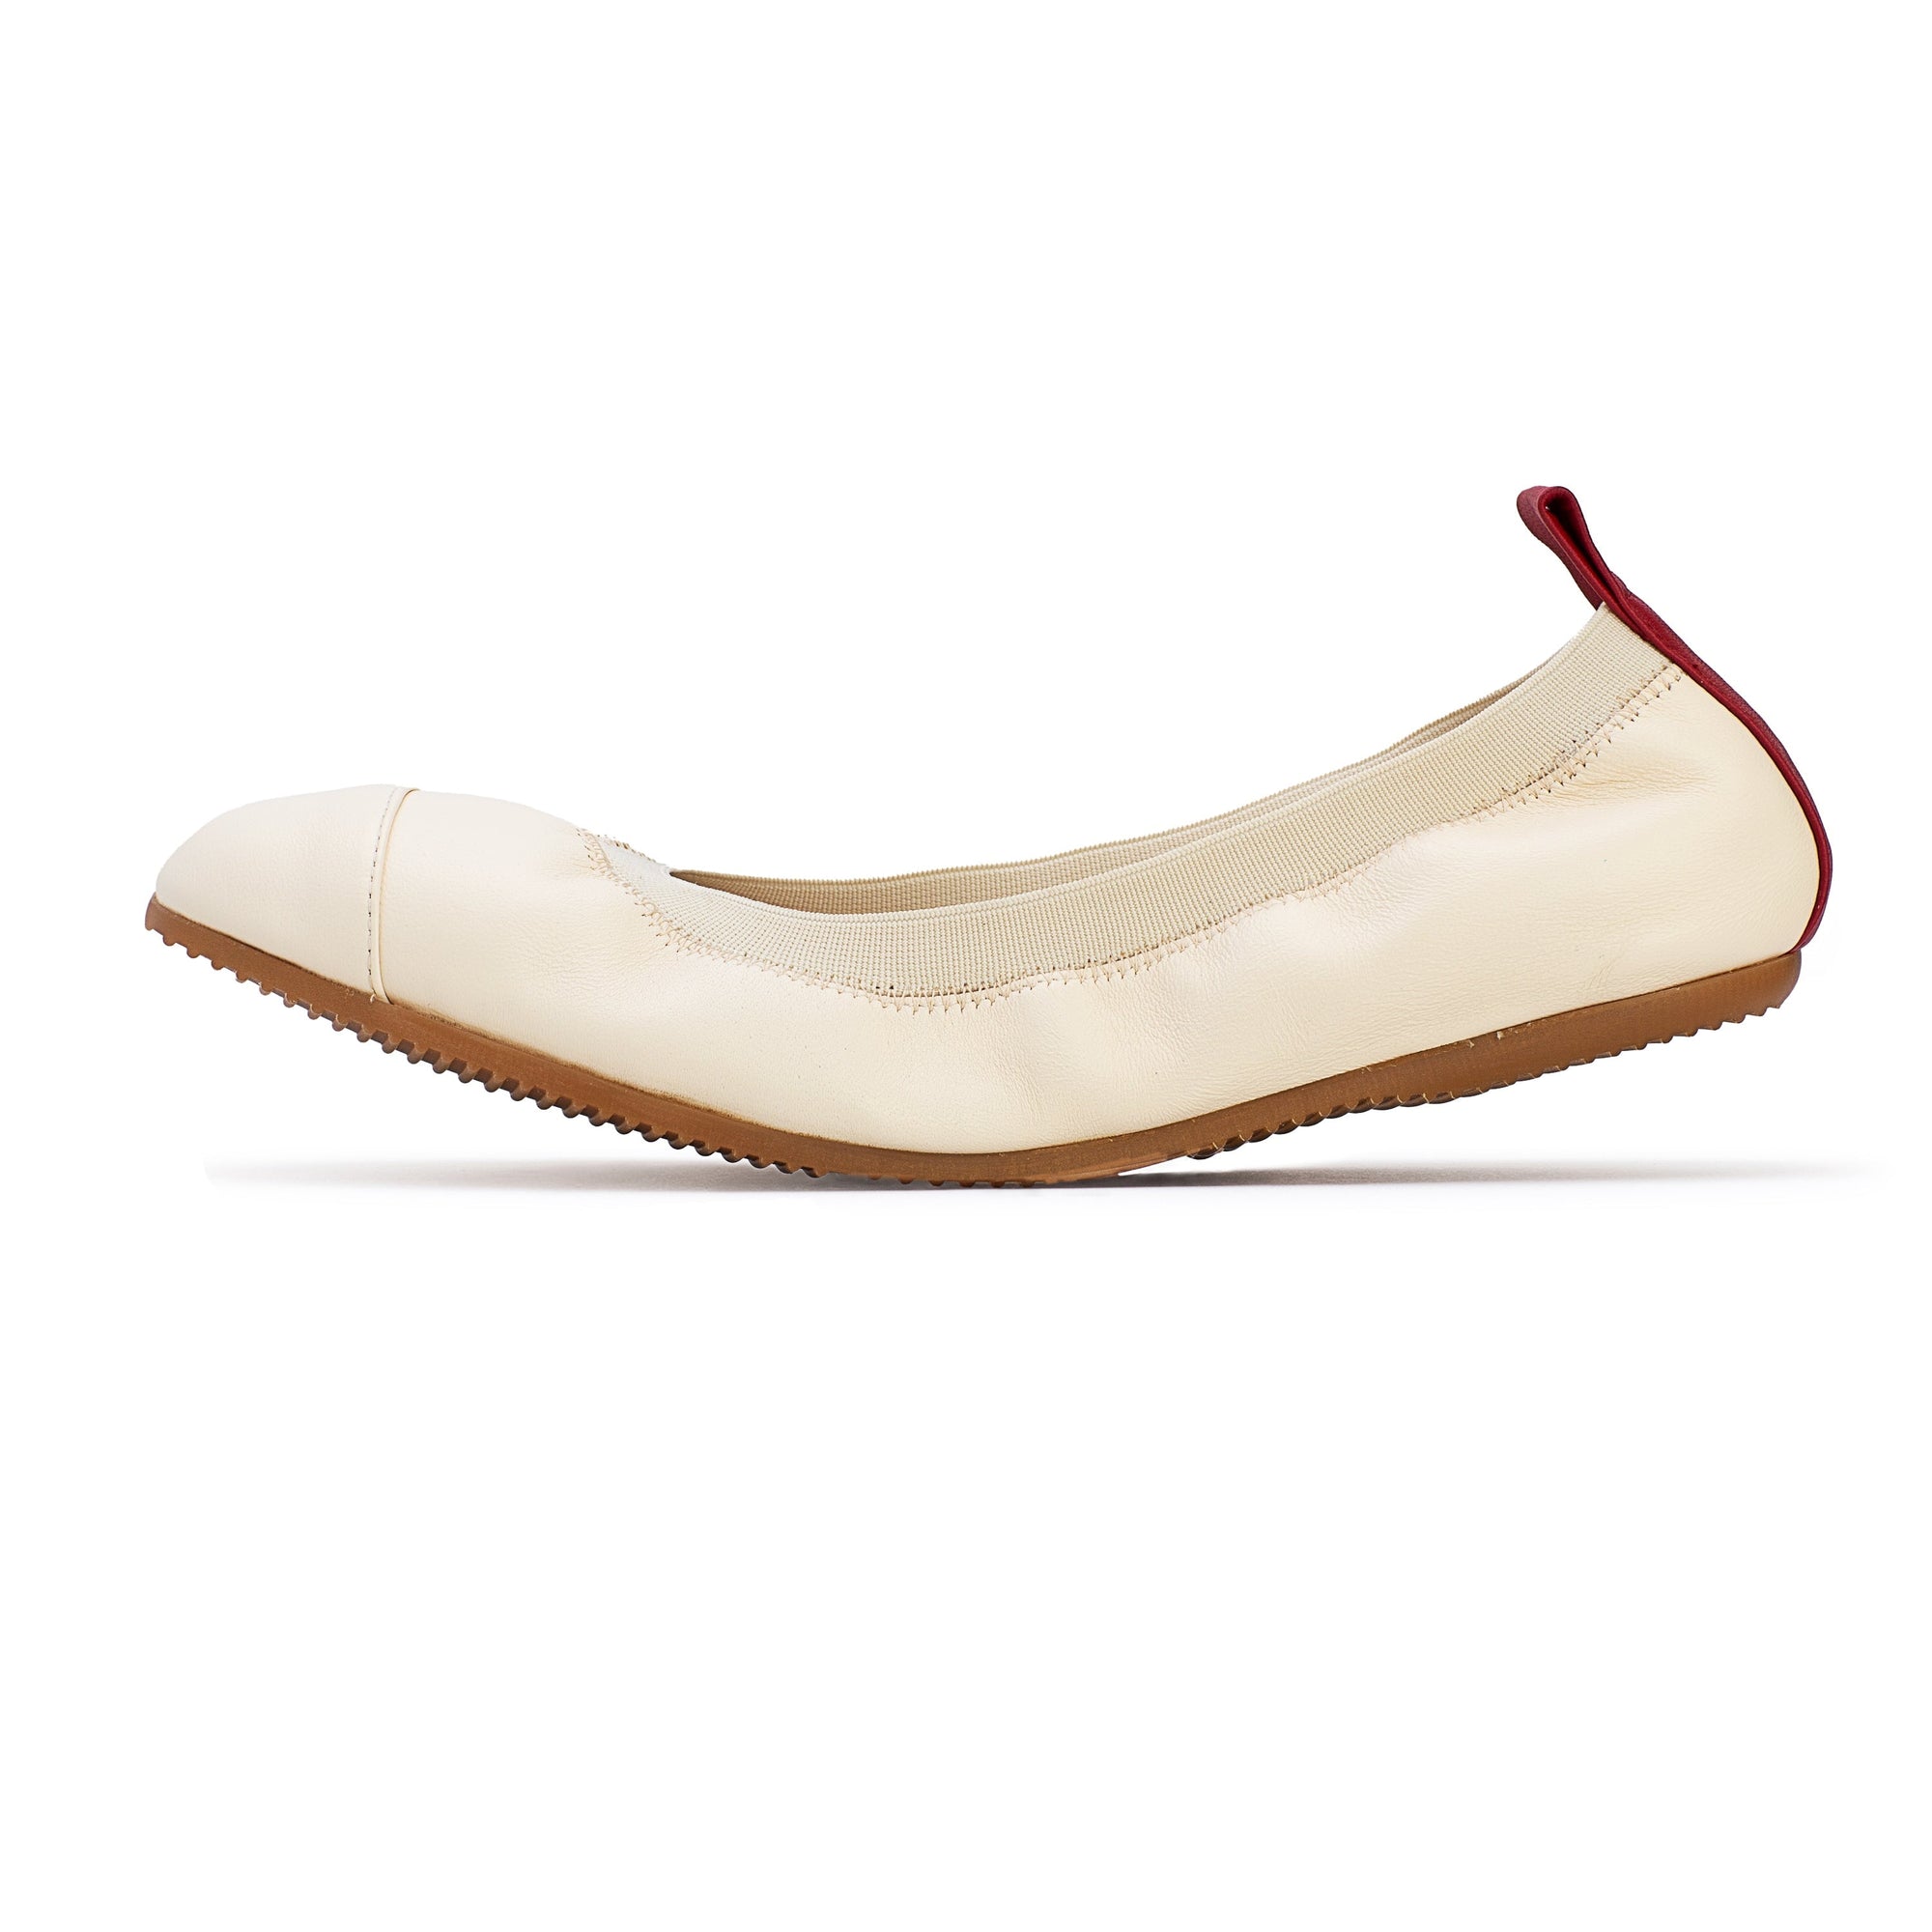 Sofia - Eggshell and Red Ballet Flats Ballet Flats Cammino Shoes 